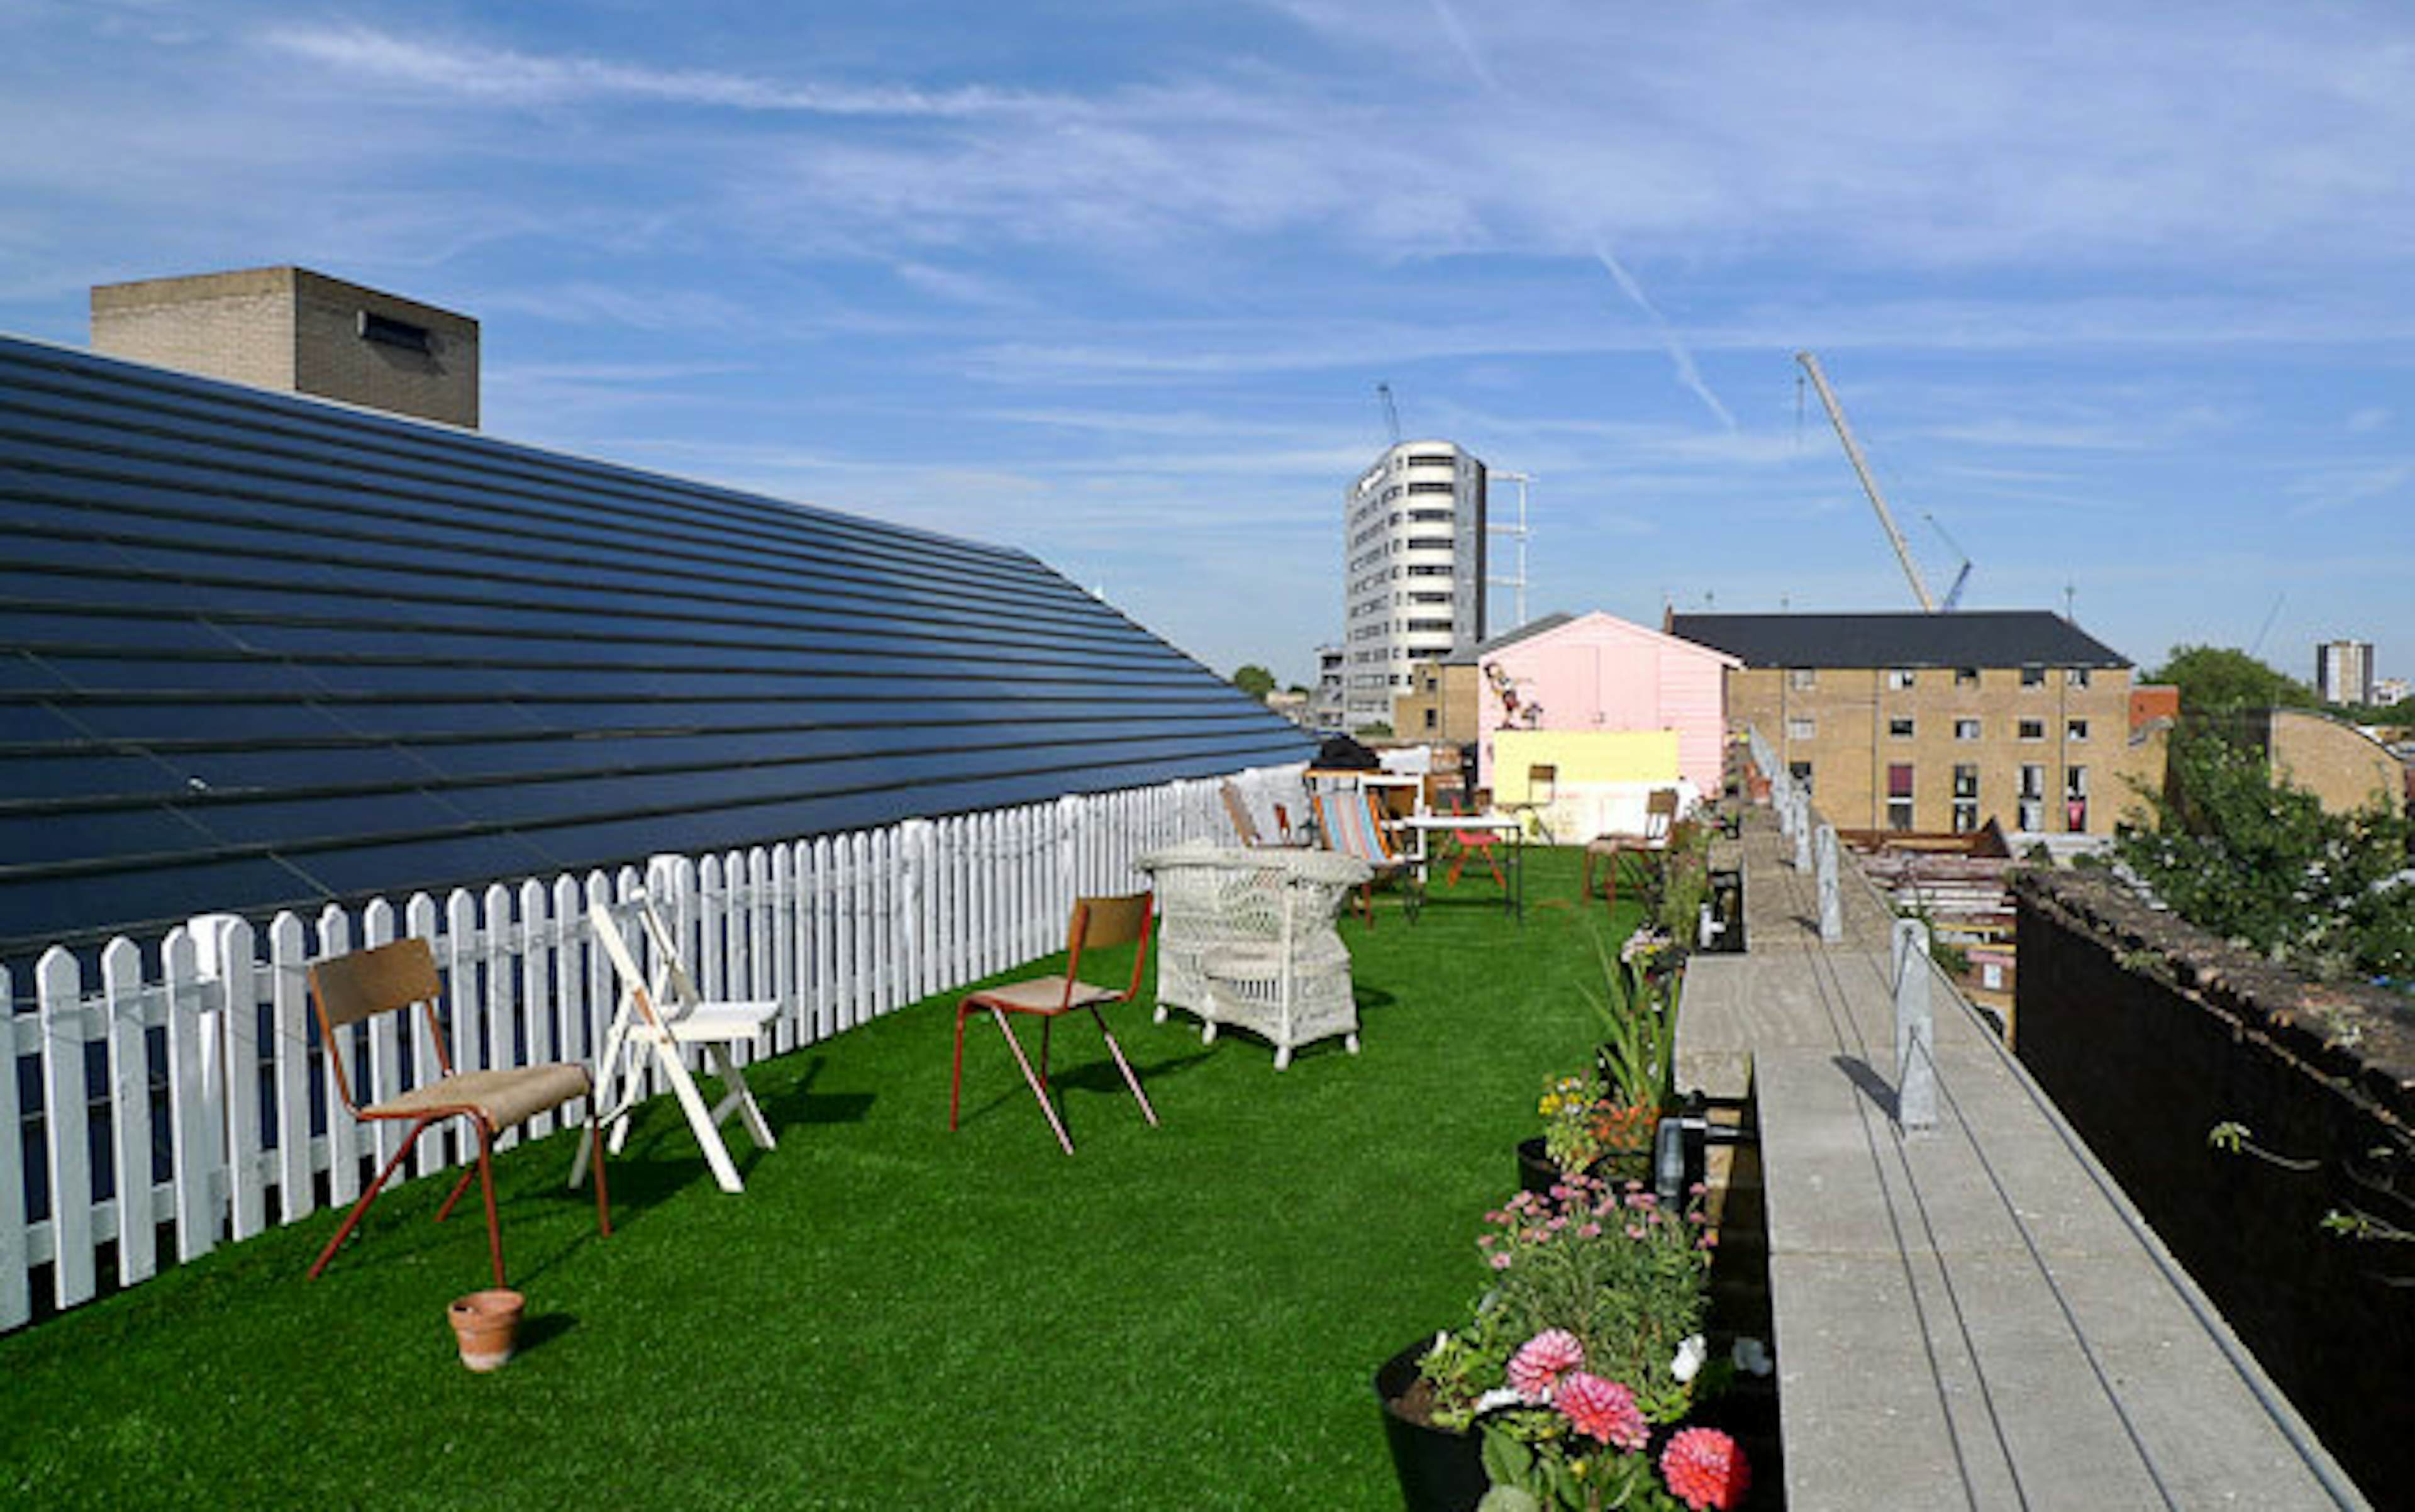 In Pictures: The Dalston Roof Park ...